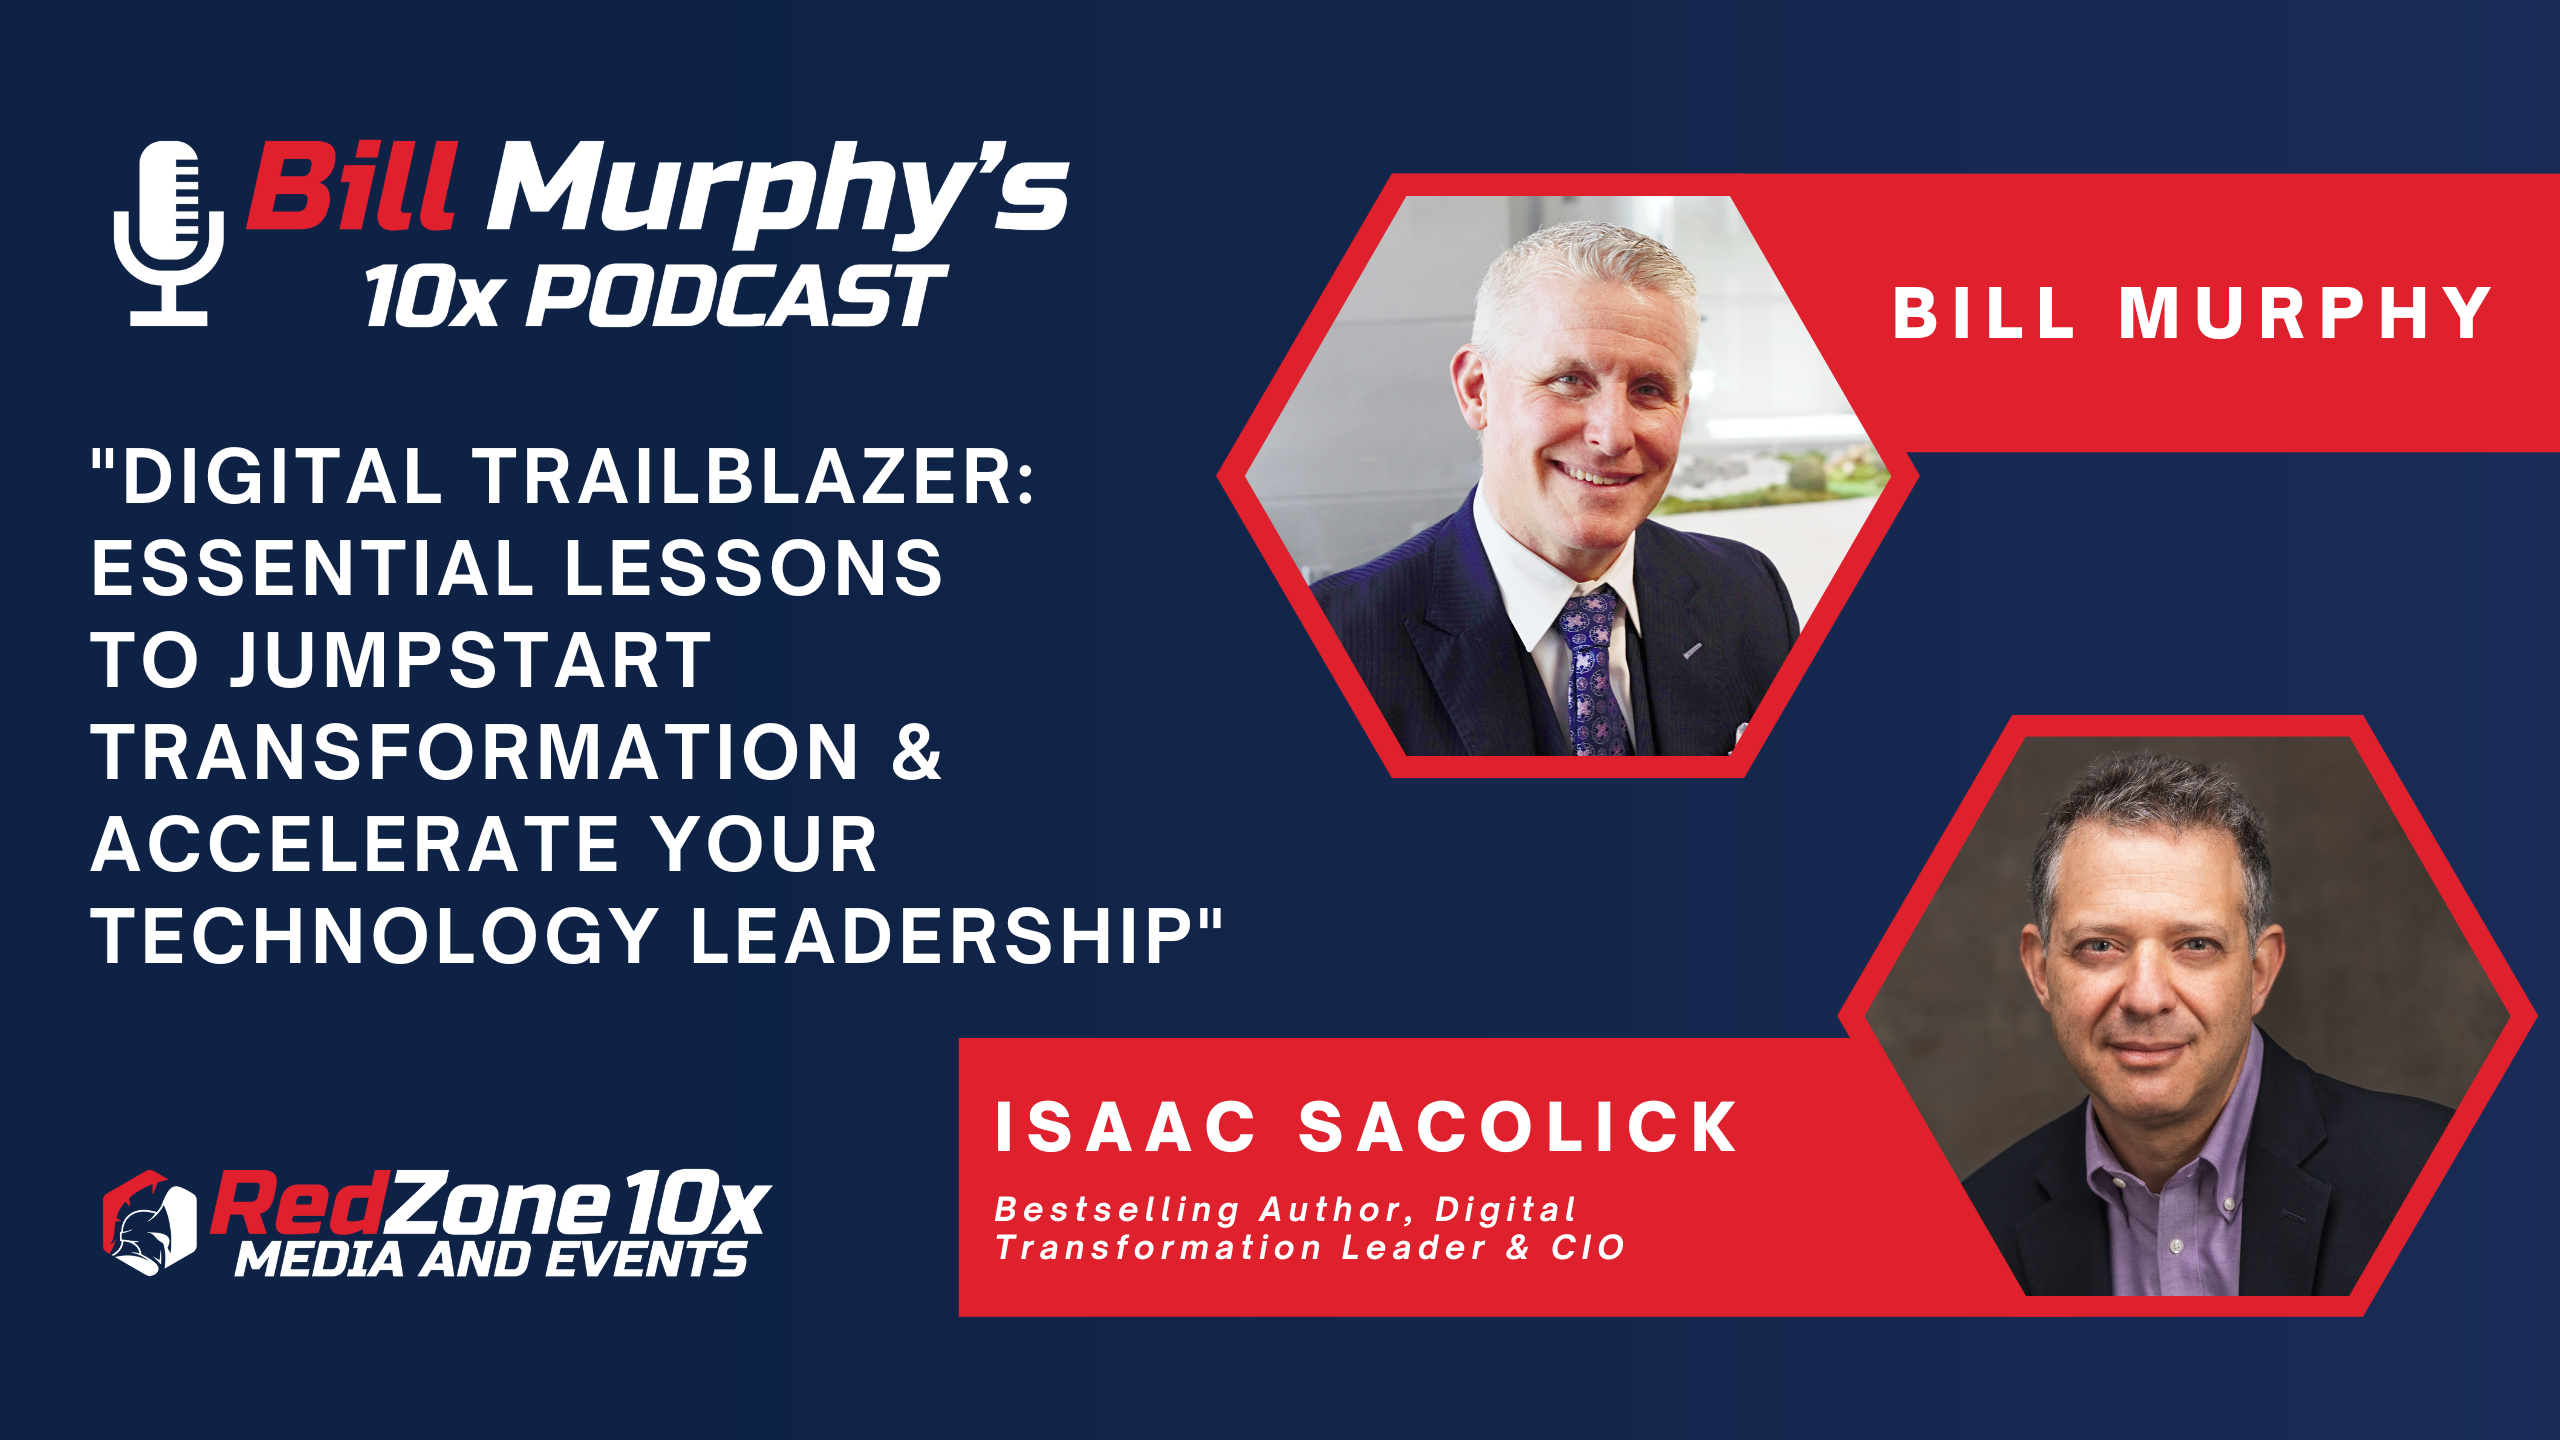 Bill Murphy's 10x Podcast - Digital Trailblazer: Essential Lessons to Jumpstart Transformation & Accelerate Your Technology Leadership - Isaac Sacolick, Bestselling Author, Digital Transformation Leader & CIO